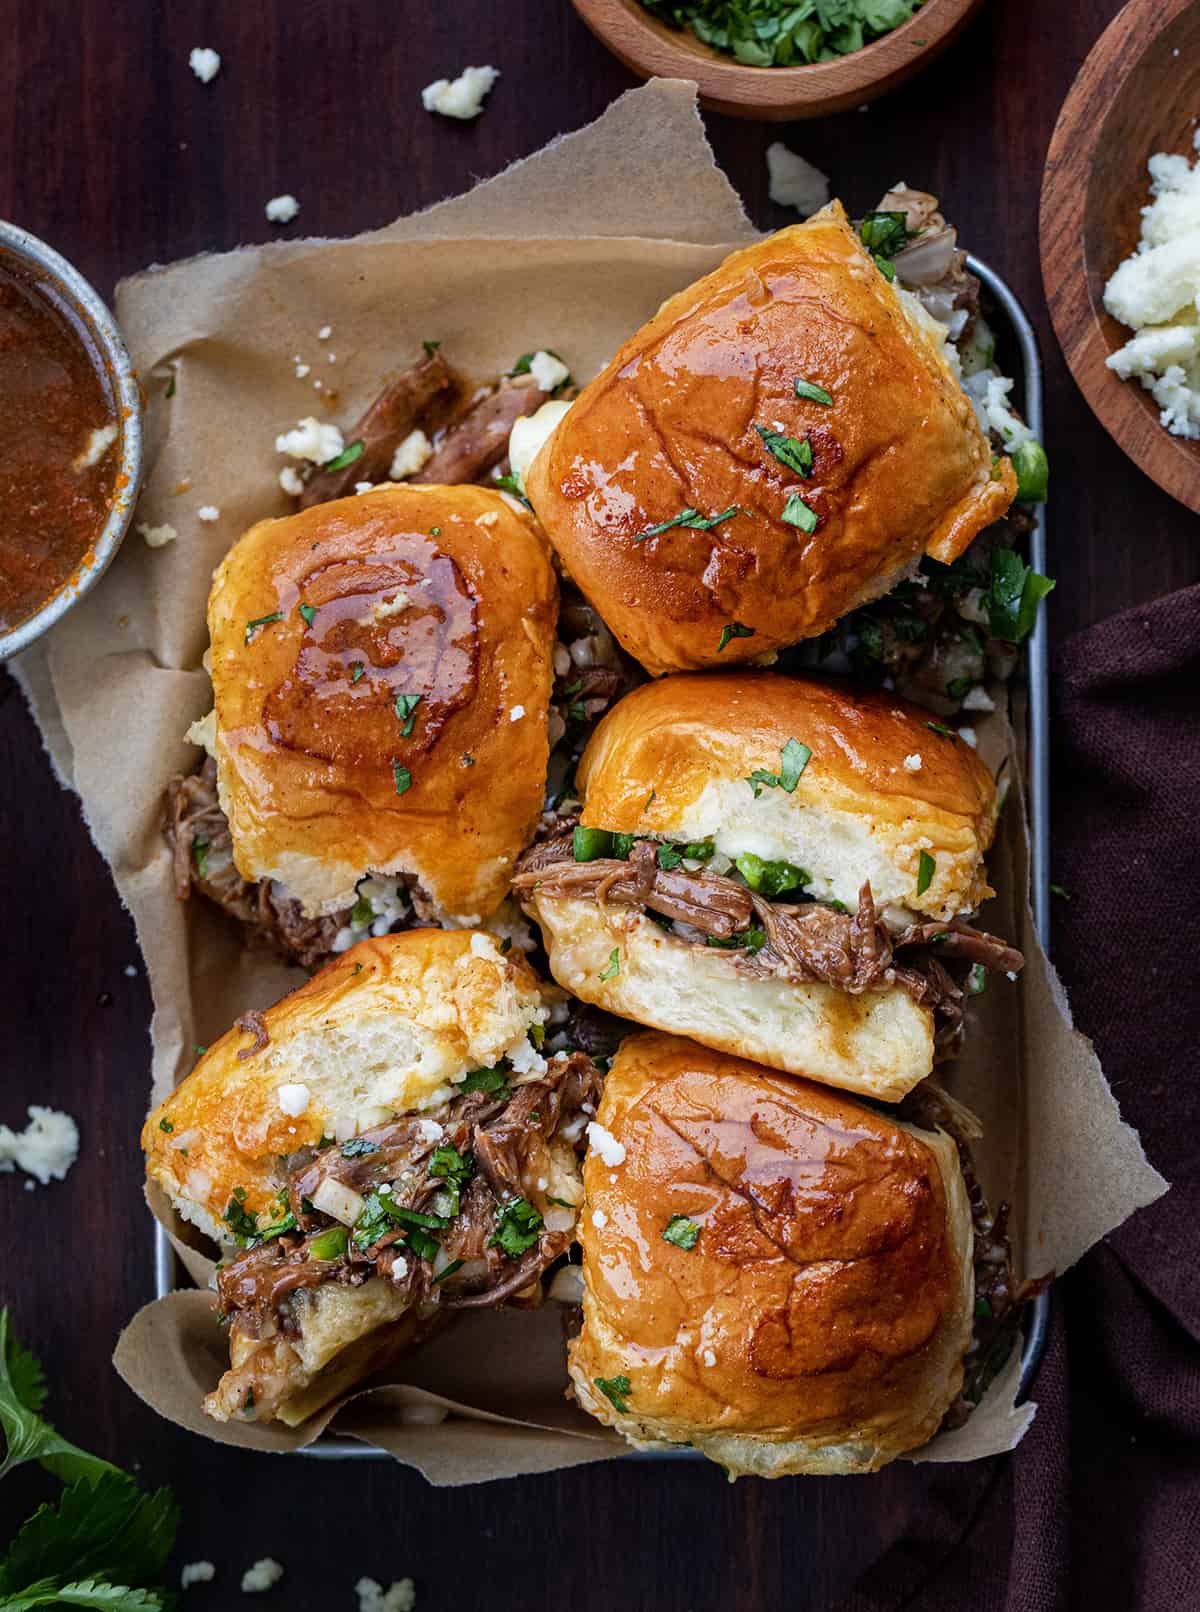 Pan of Shredded Beef Sliders Next to the Sauce on a Cutting Board.